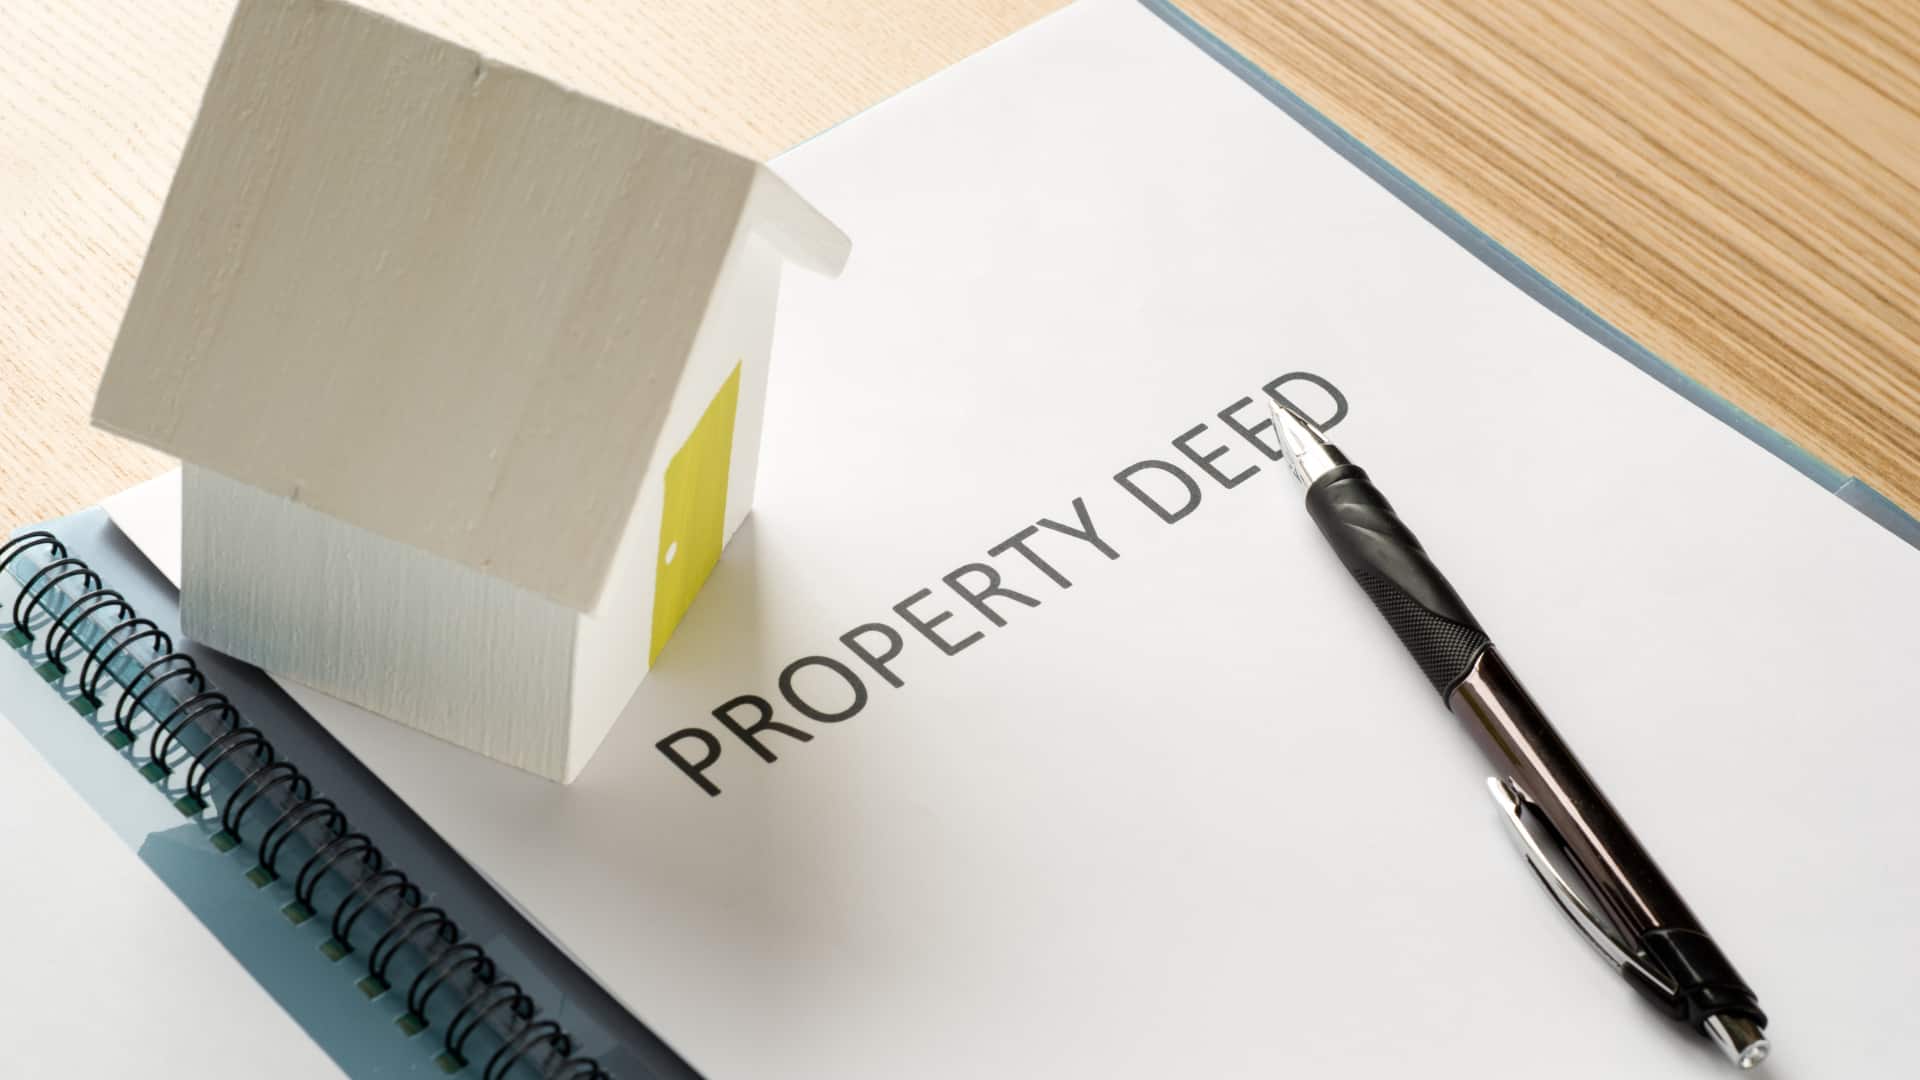 An image of a property model on top of a property deed document.